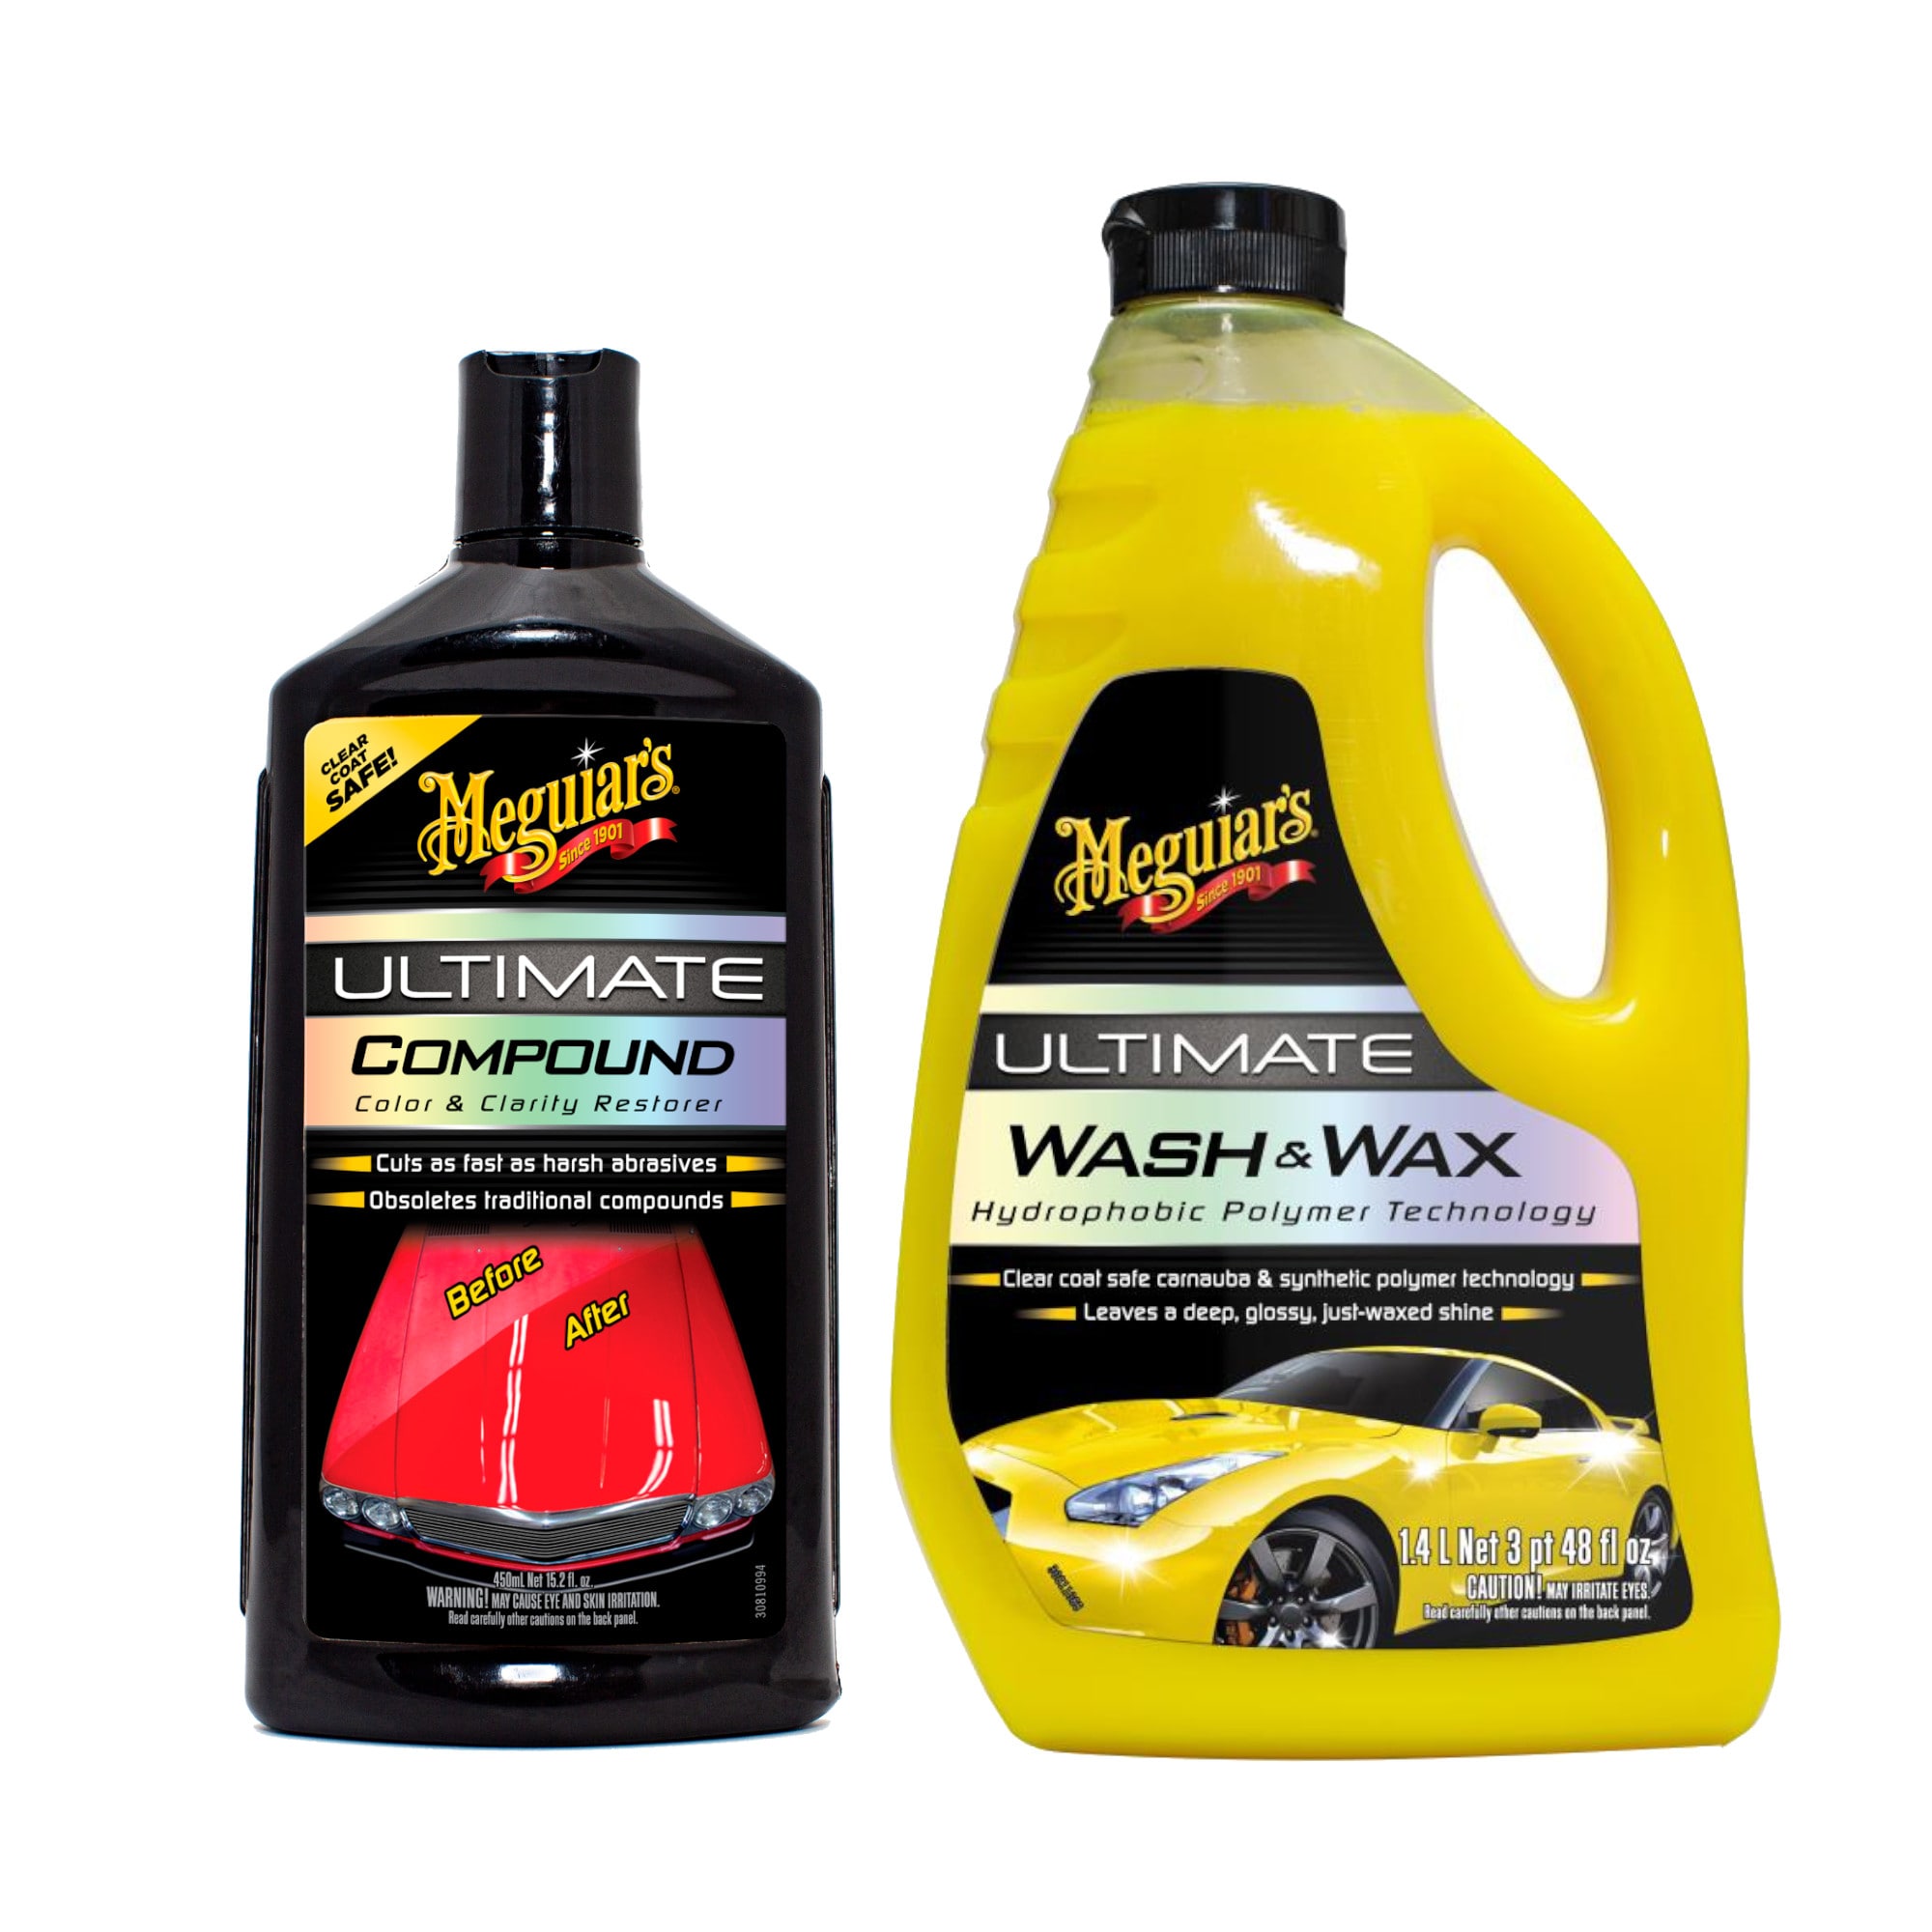 Meguiar's - 💥Quik Interior Detailer = Cleans & leaves an original  appearance. Lightly cleans and offer protection on All interior surfaces.  💥Natural Shine Protectant = Cleans & leaves a natural color 